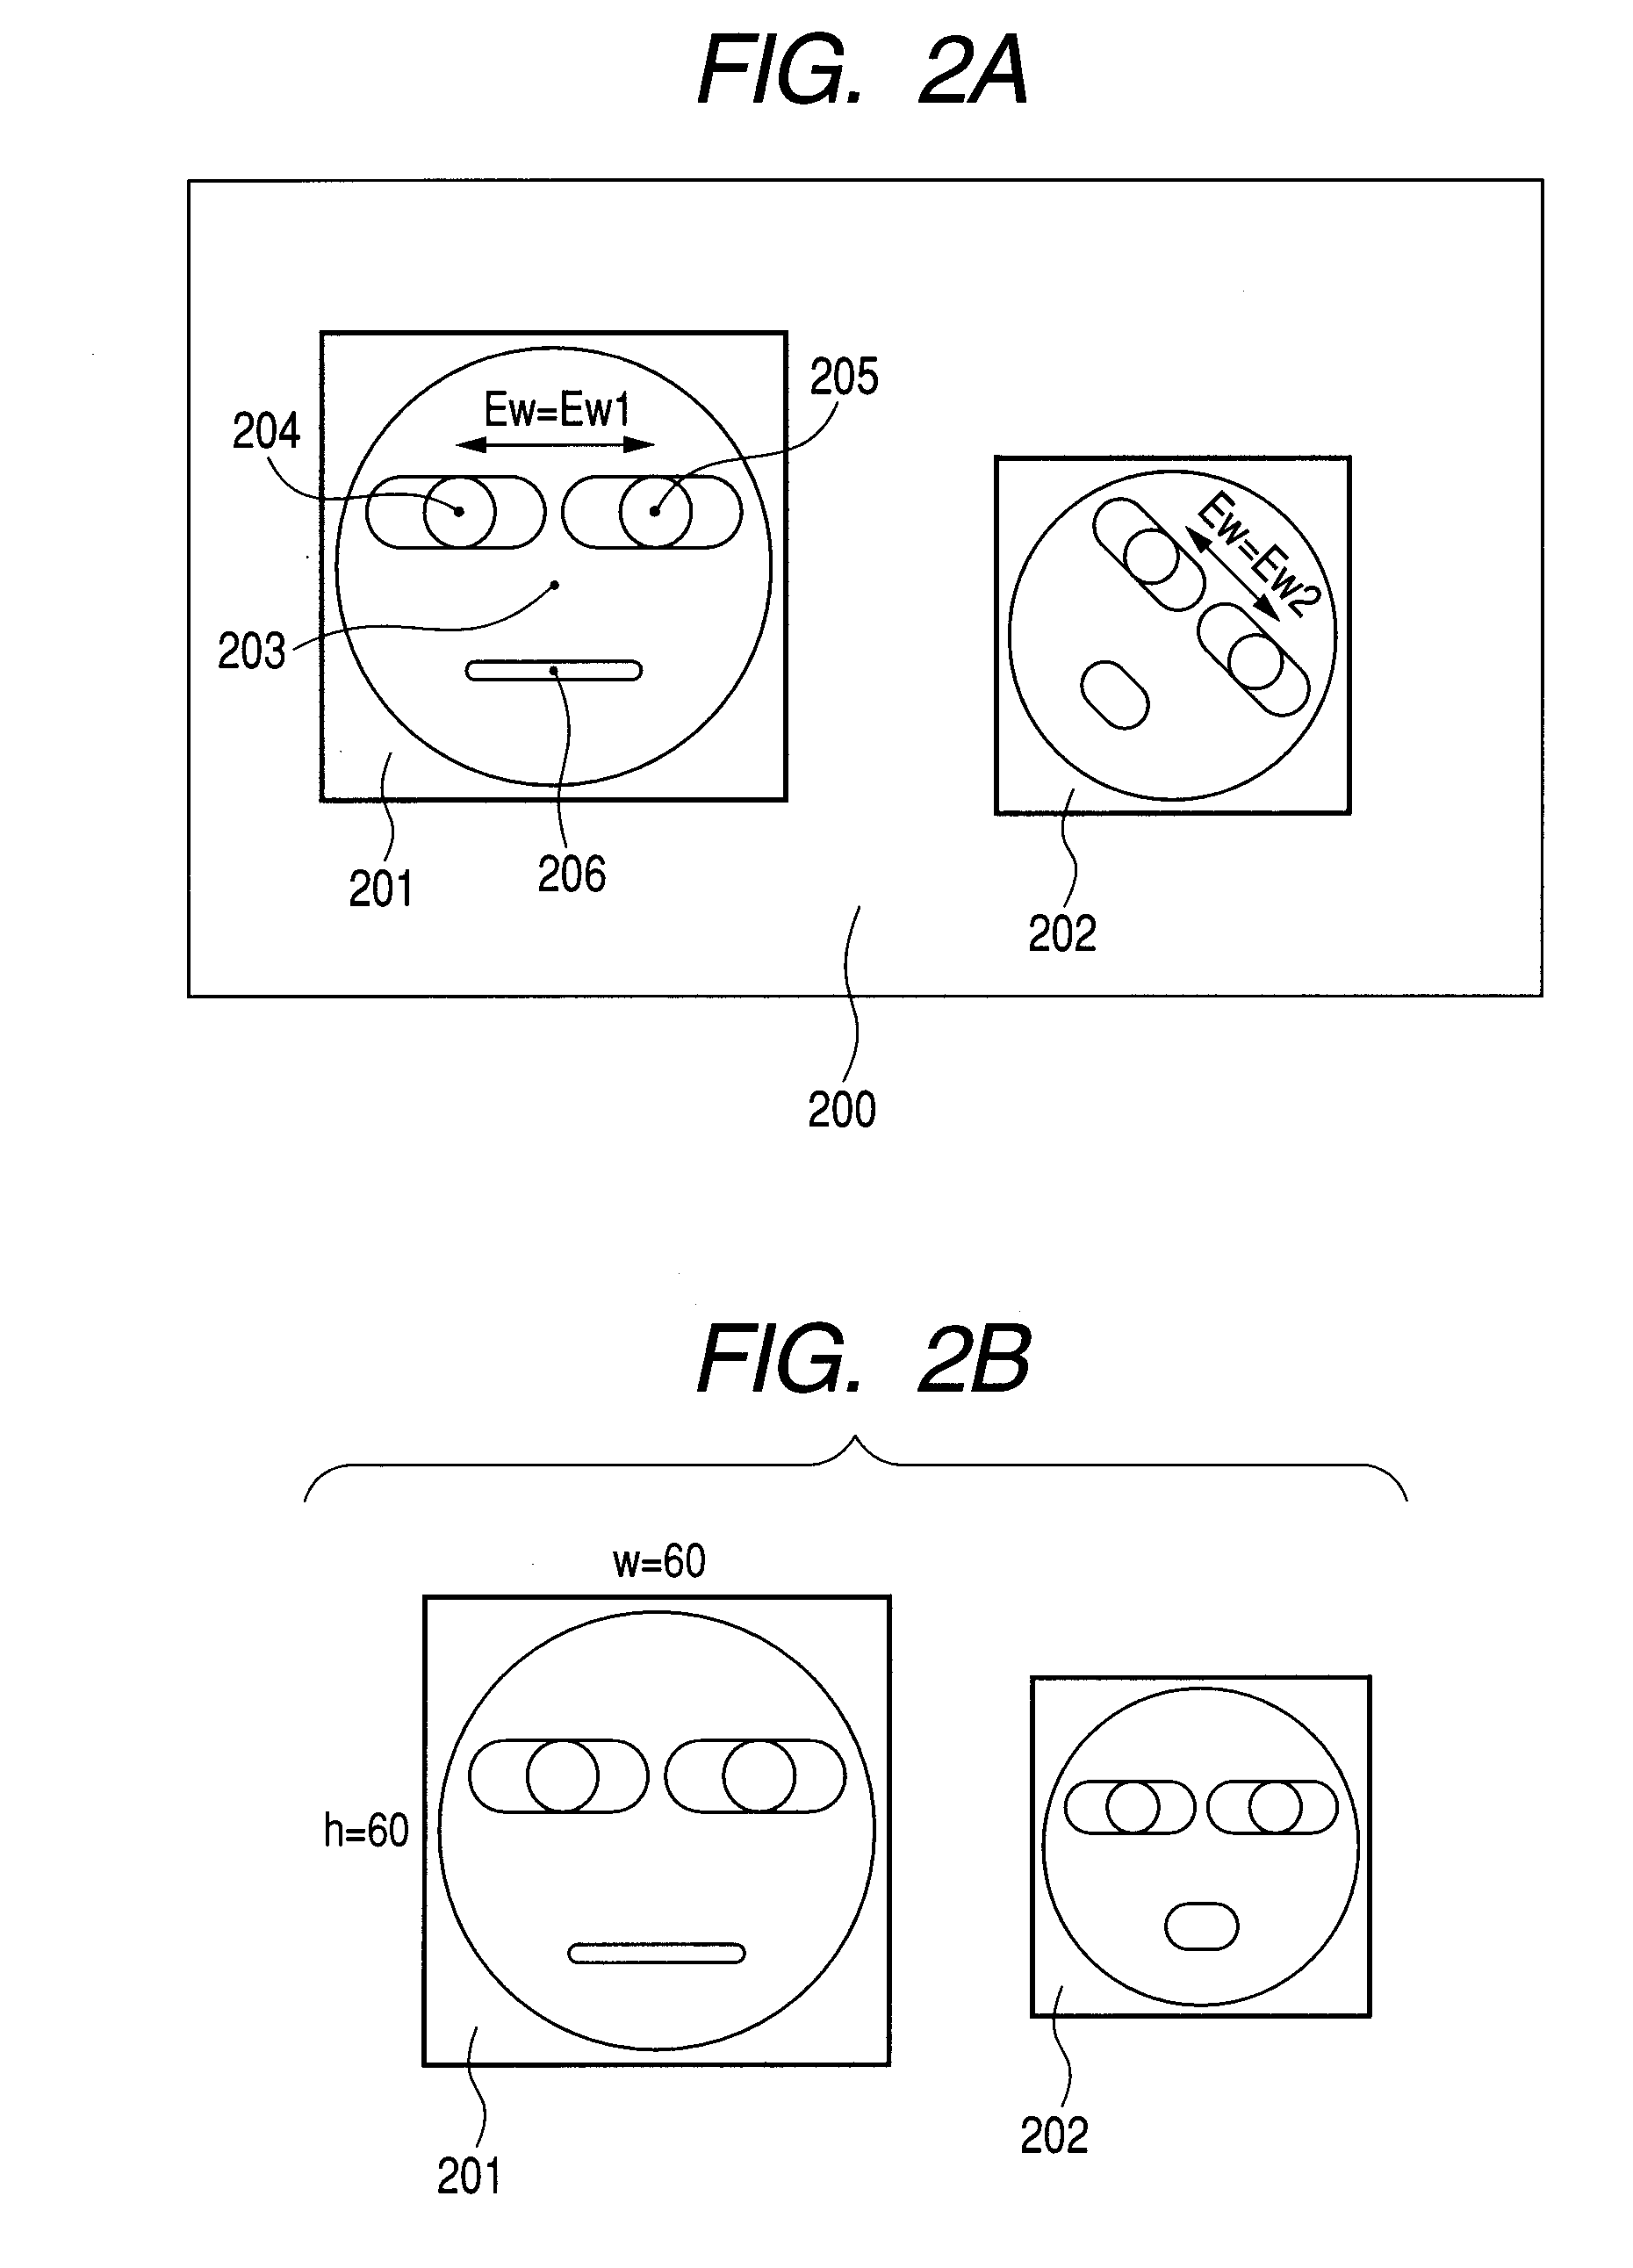 Image recognition apparatus for identifying facial expression or individual, and method for the same